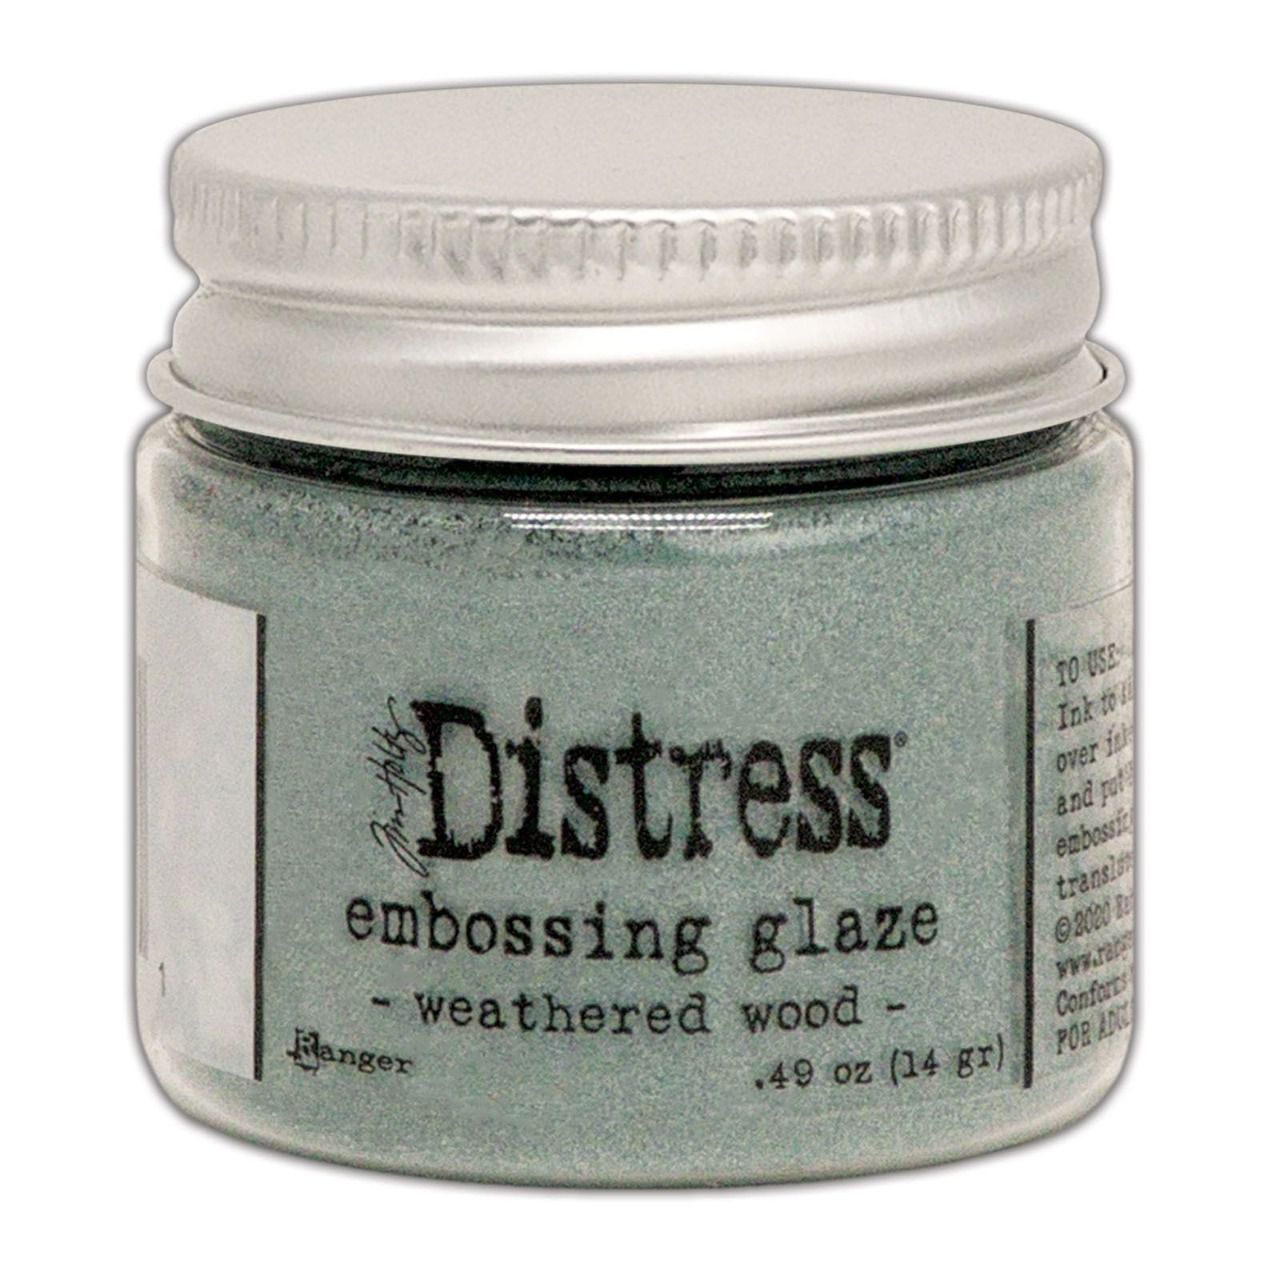 Distress Embossing glaze, Tim Holtz, couleur : Weathered wood